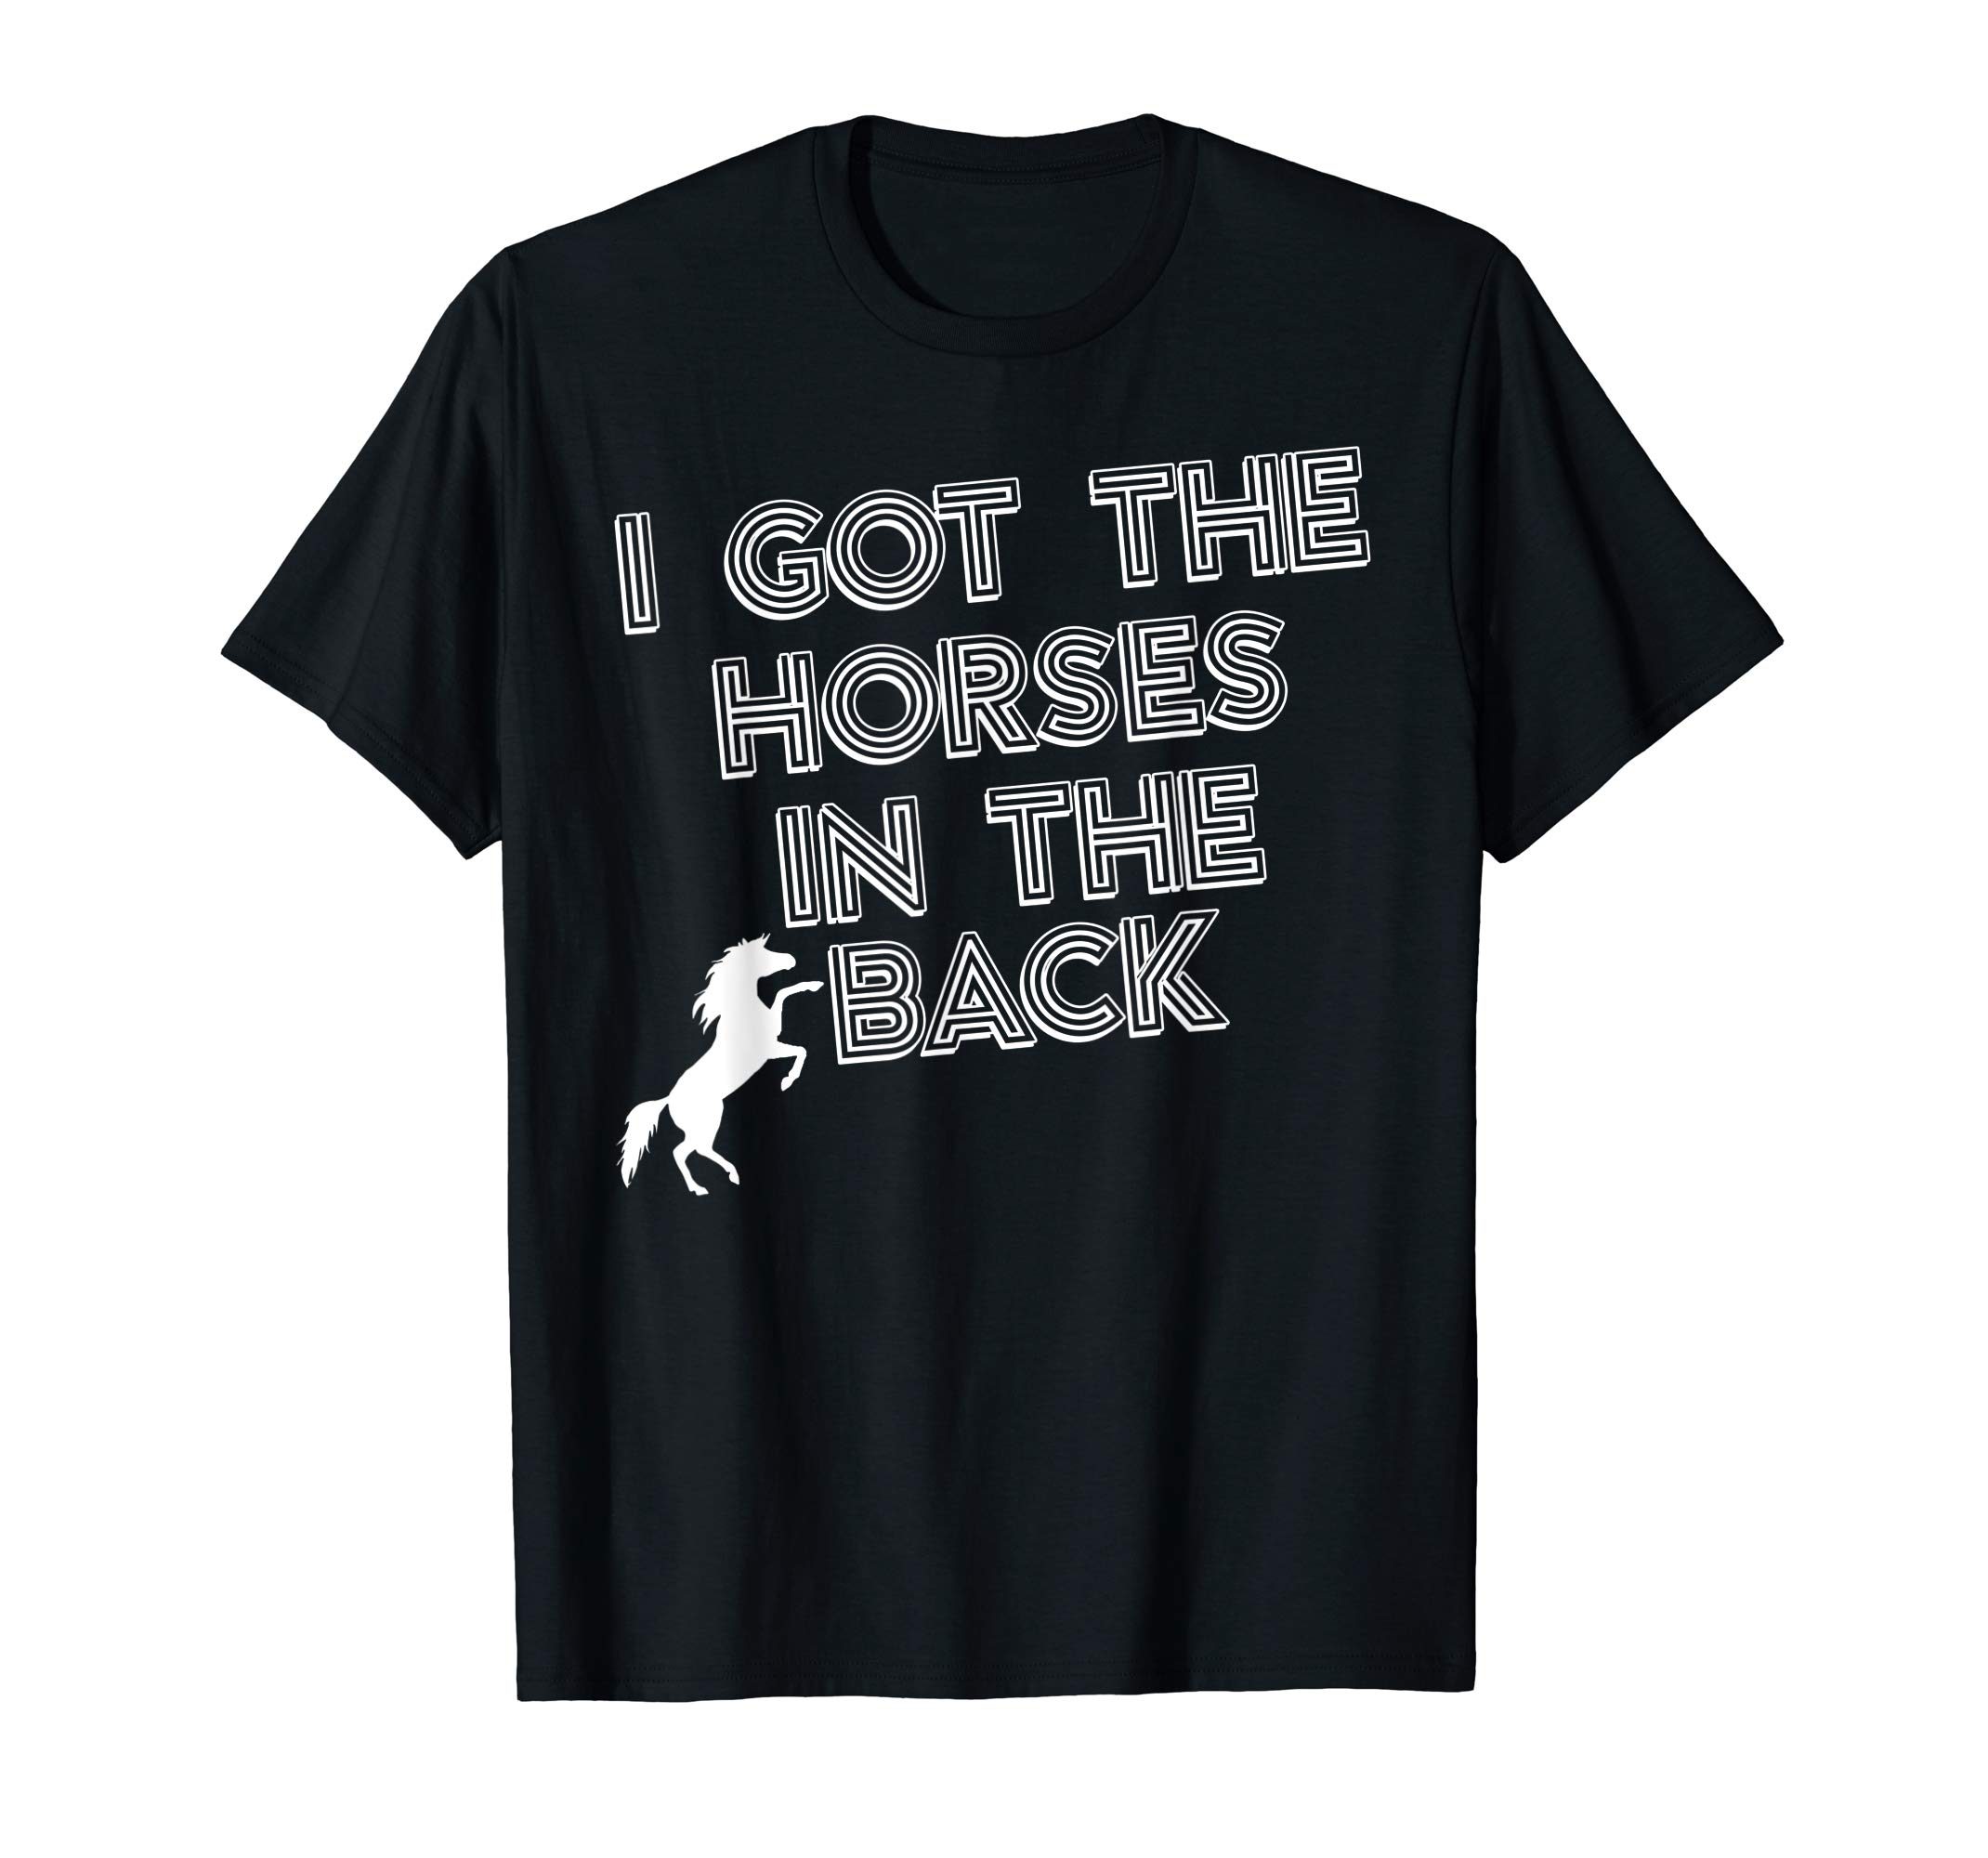 Old Town Road Horses In The Back Country Rap Music T-Shirt ...